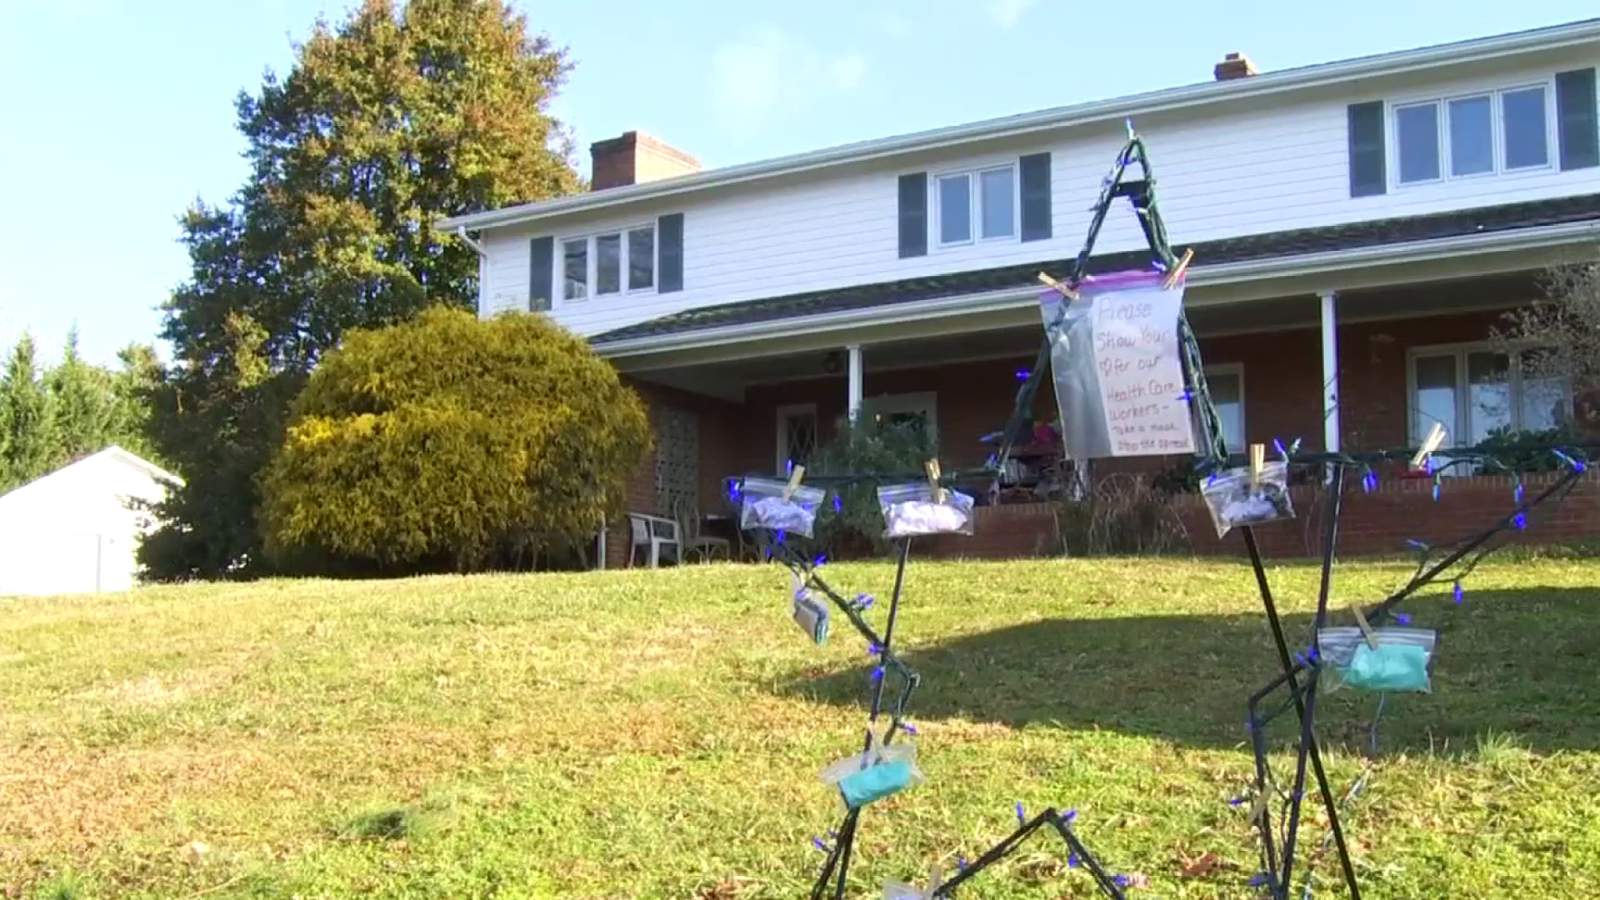 ‘Take a mask. Stop the spread’: Salem woman honors healthcare workers with yard display